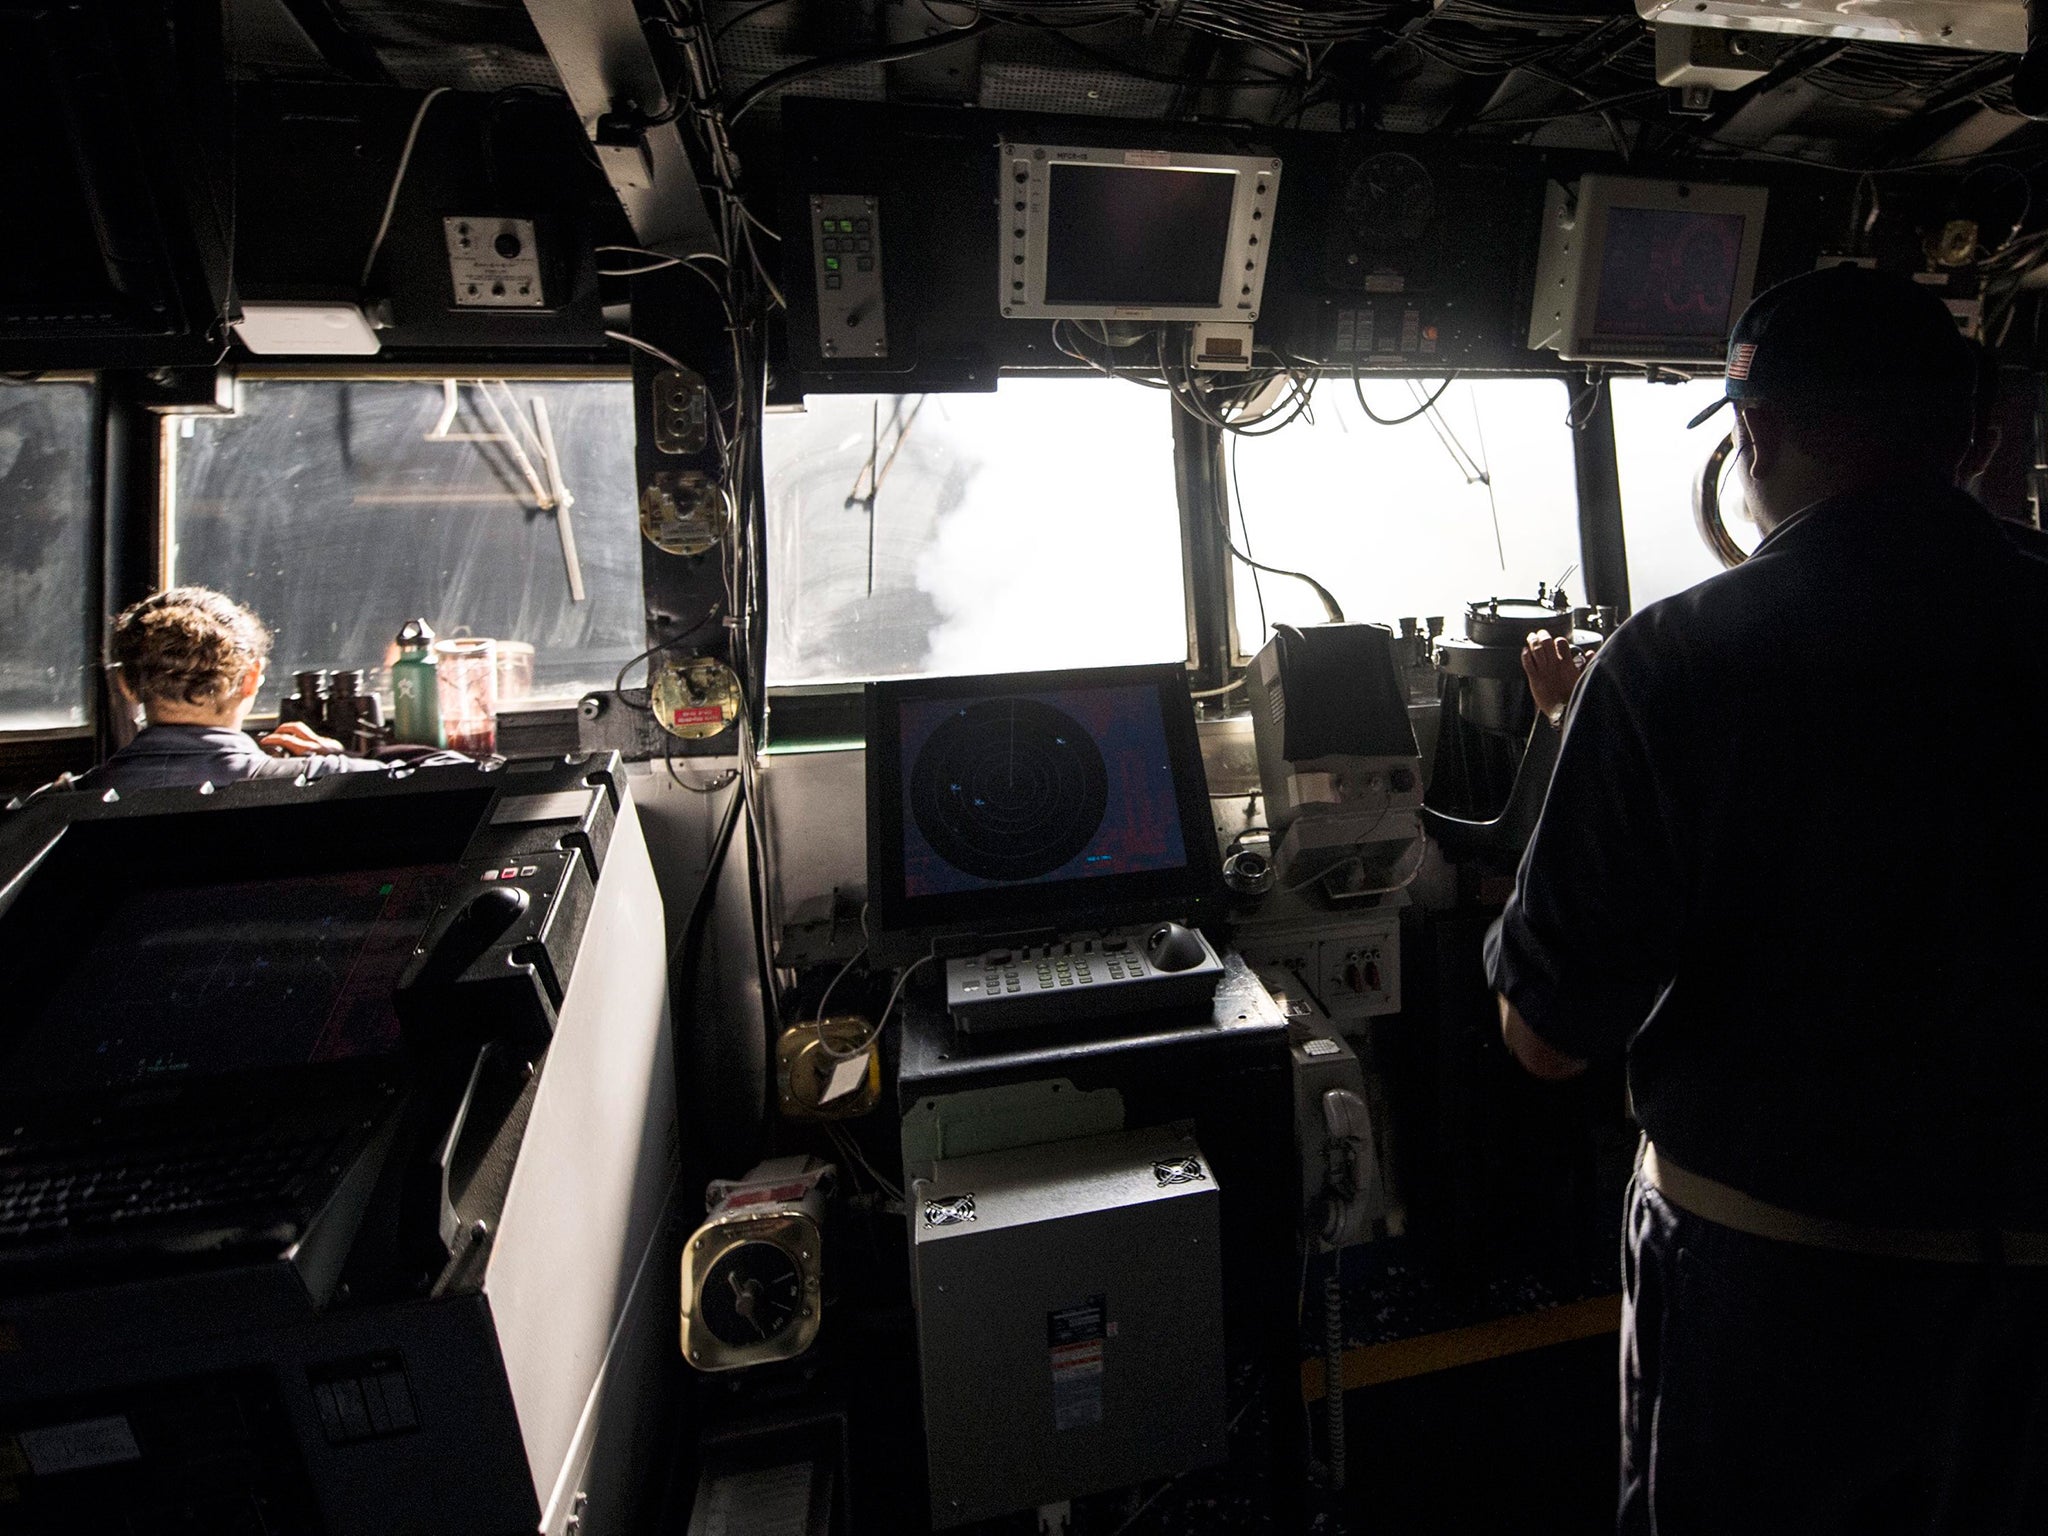 US navy sailors standing watch on the bridge while Tomahawk cruise missiles are launched against Isis targets in Syria, aboard the guided-missile cruiser USS Philippine Sea (CG 58), in the Arabian Gulf